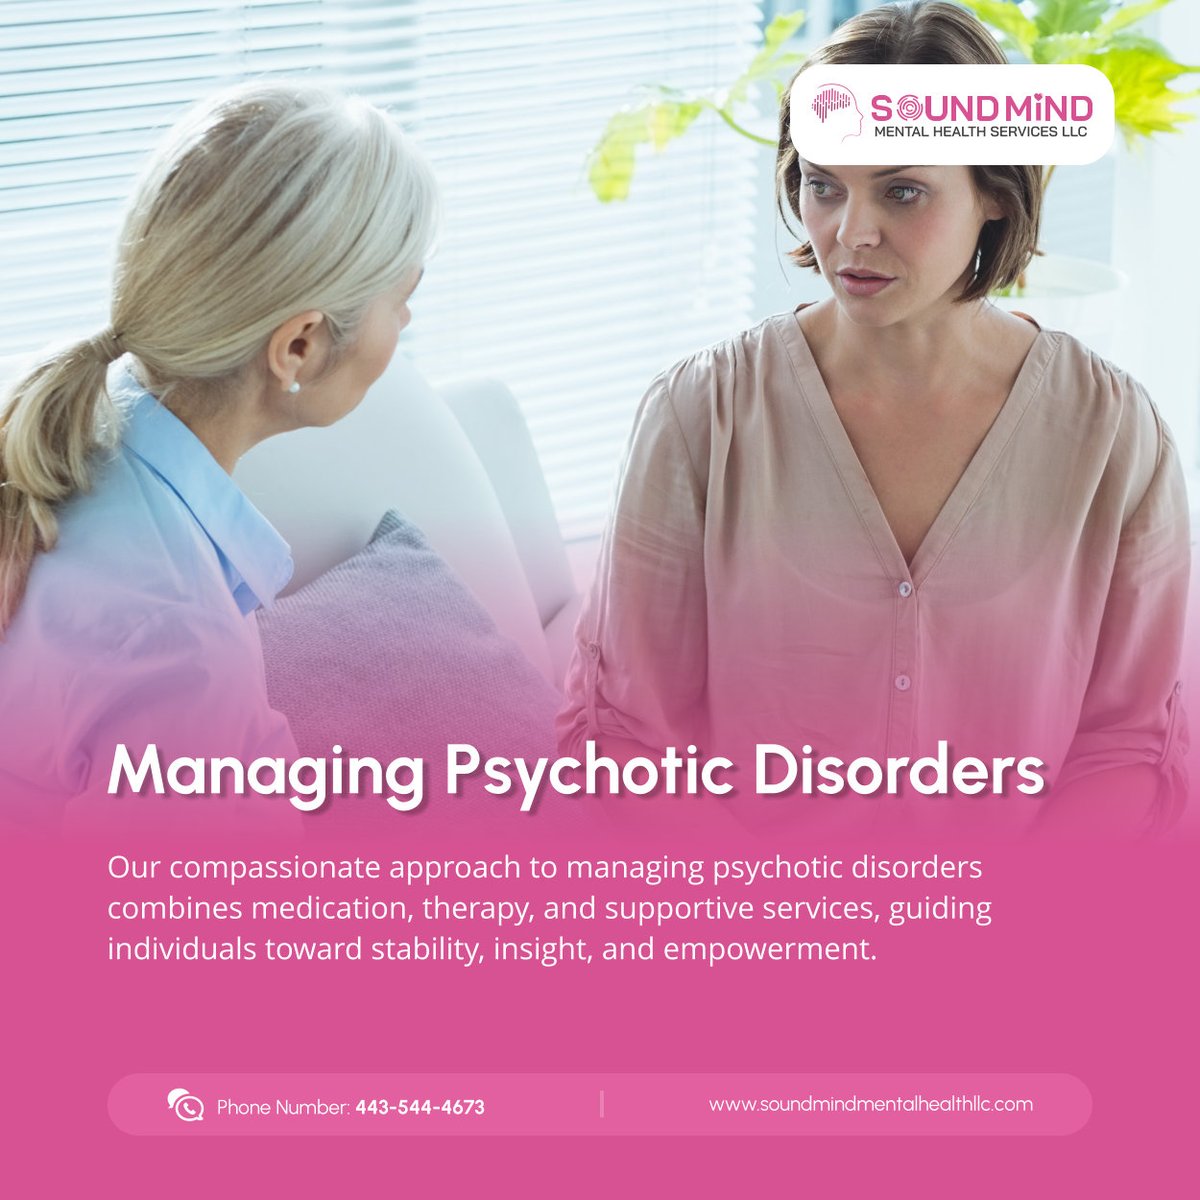 Embrace stability and empowerment on your journey with psychotic disorders, supported by our compassionate team and comprehensive approach to care. 

#MentalHealthCare #BehavioralHealthCare #Maryland #WashingtonDC #MentalHealthMatters #PsychoticDisorders